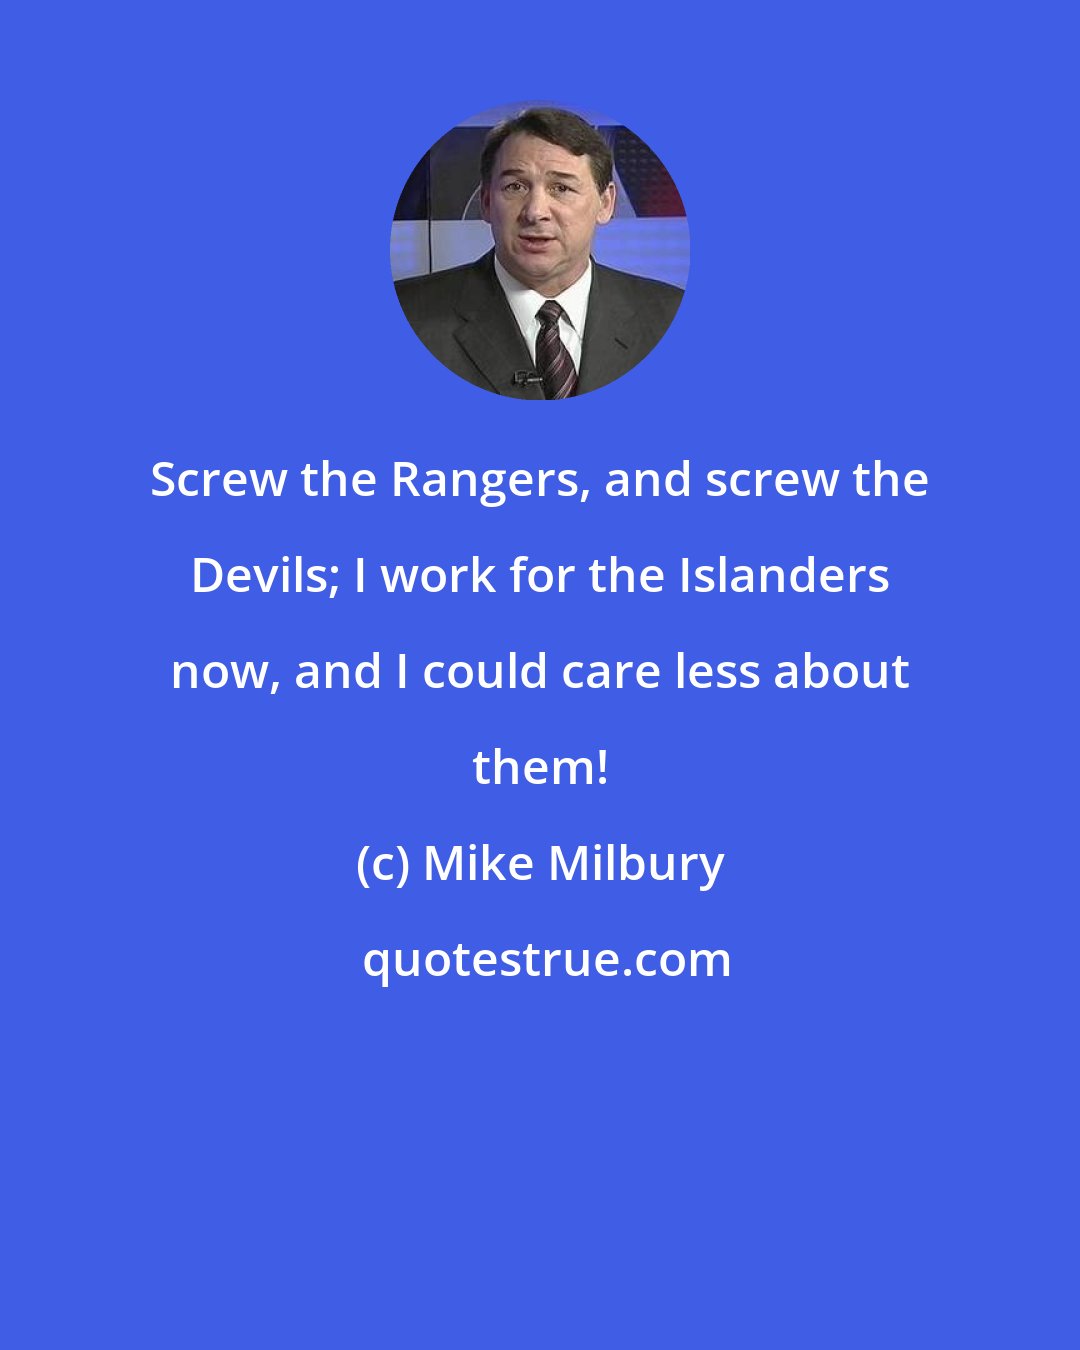 Mike Milbury: Screw the Rangers, and screw the Devils; I work for the Islanders now, and I could care less about them!